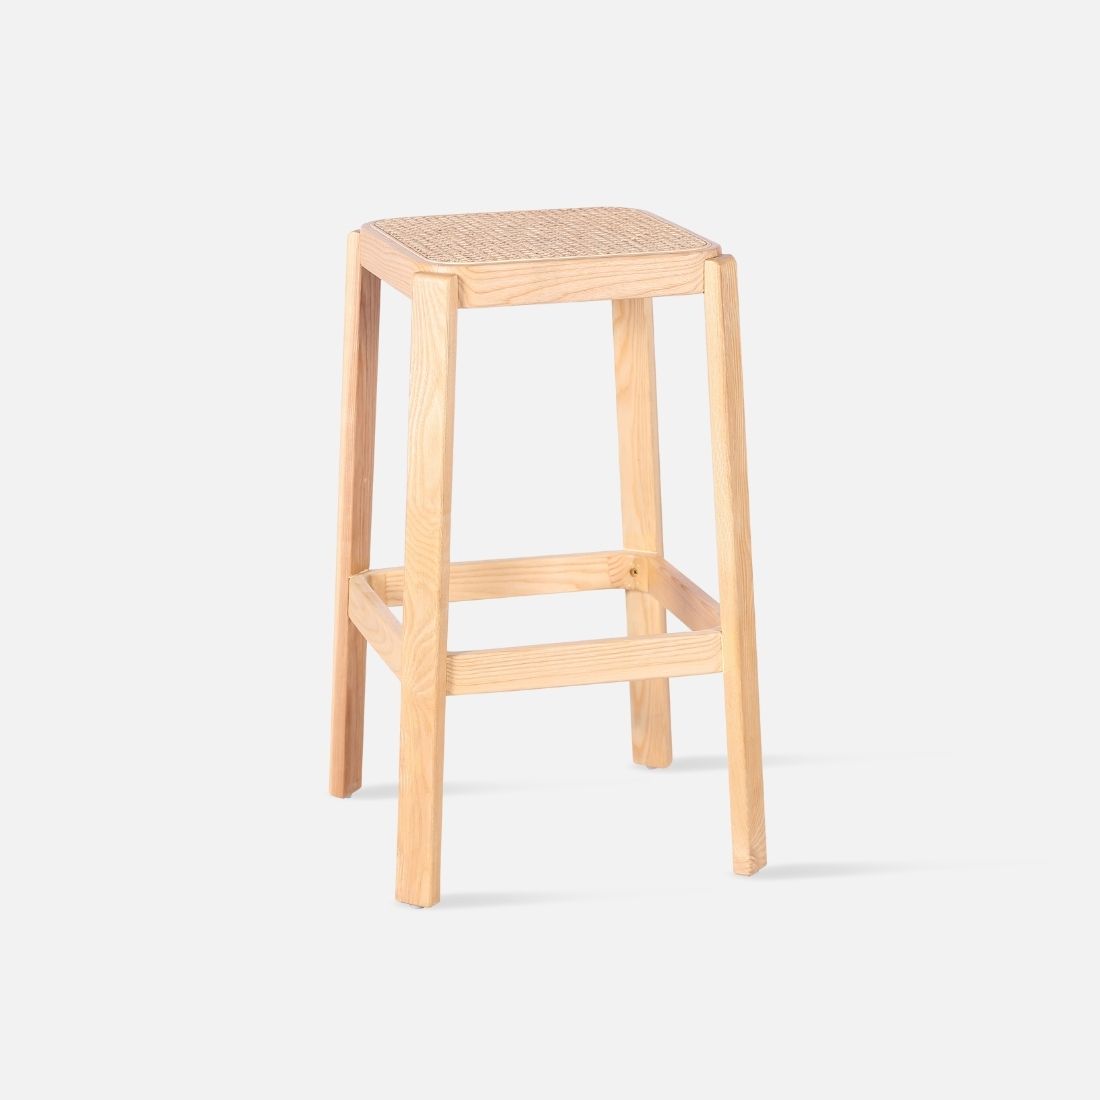 OXISTA side table